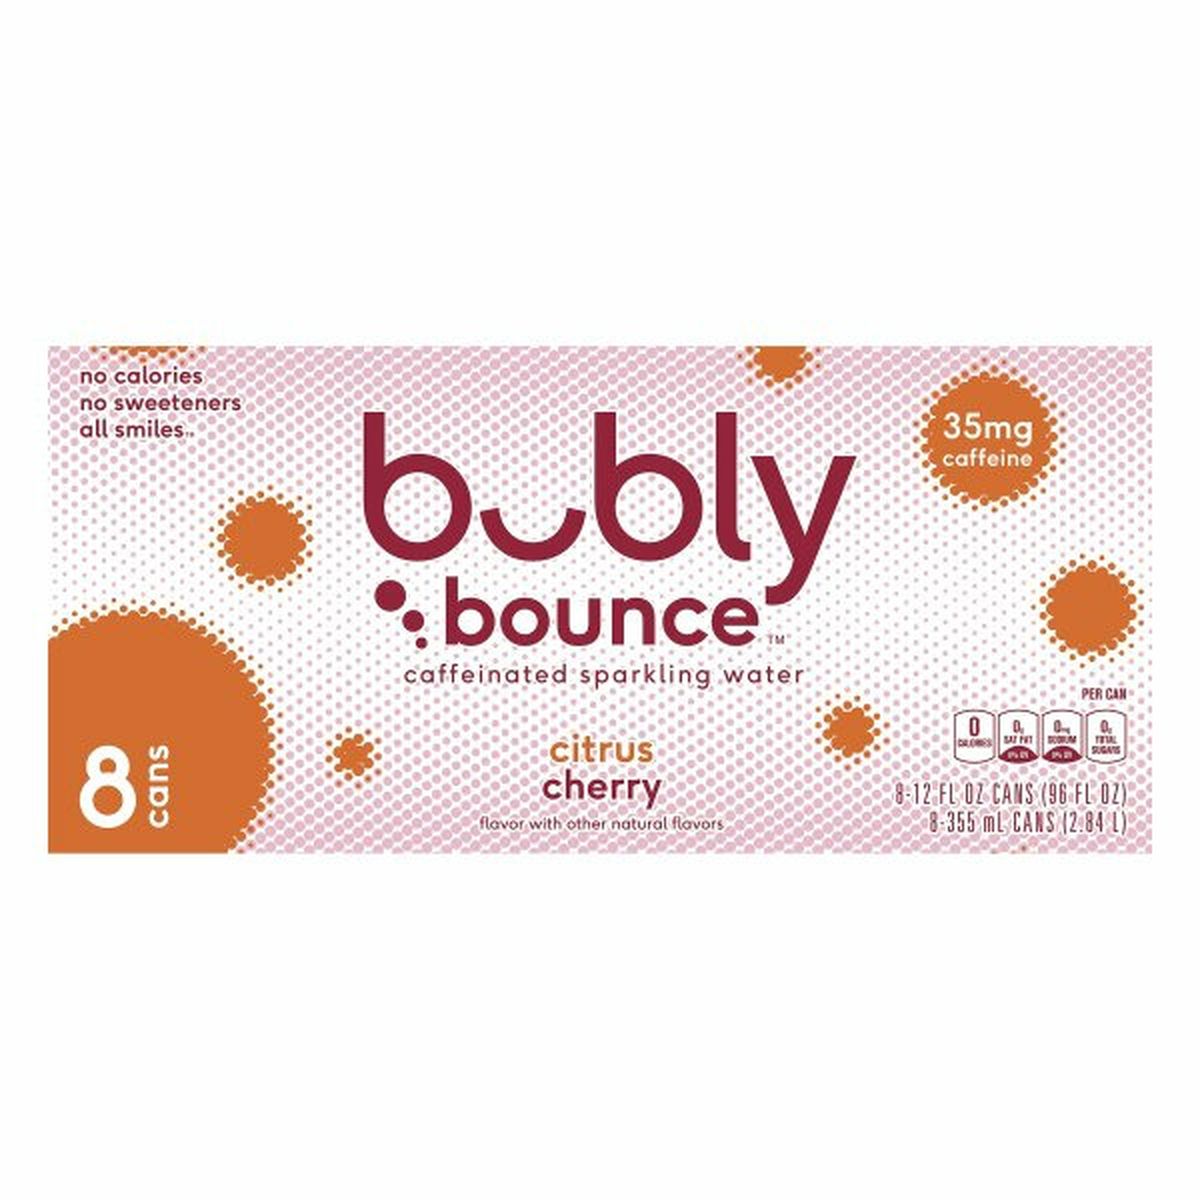 Calories in bubly Sparkling Water, Caffeinated, Citrus Cherry Flavor